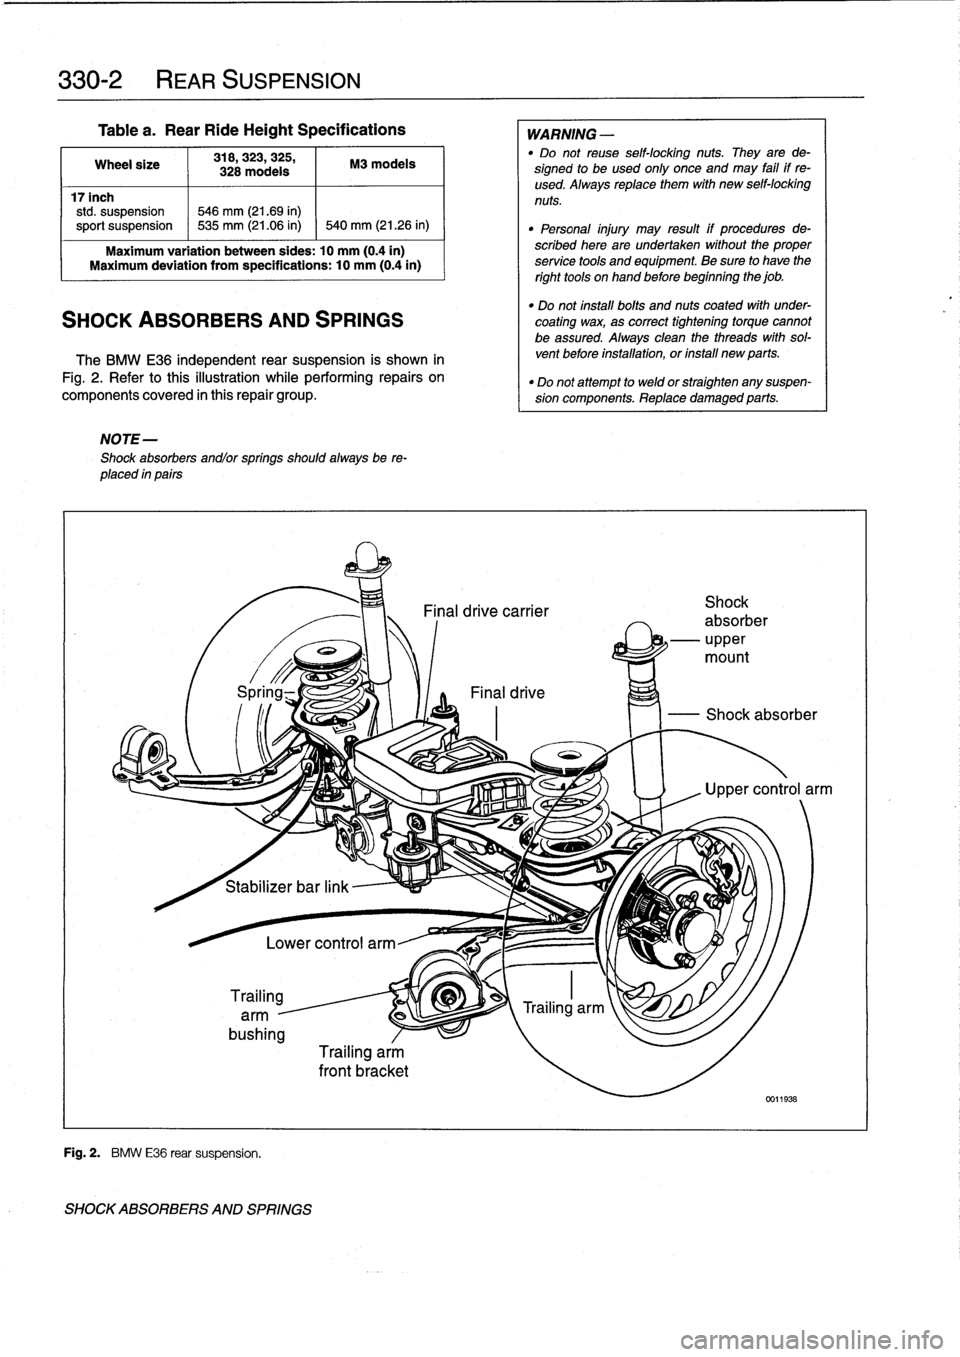 BMW 323i 1993 E36 Owners Guide 
330-2

	

REAR
SUSPENSION

Table
a
.
Rear
RideHeight
Specifications

Wheel
size

	

318,323,
325,

	

M3
modeis
328
modeis

17inch
std
.
suspension

	

546
mm
(21.69
in)
sport
suspension

	

~
535
mm